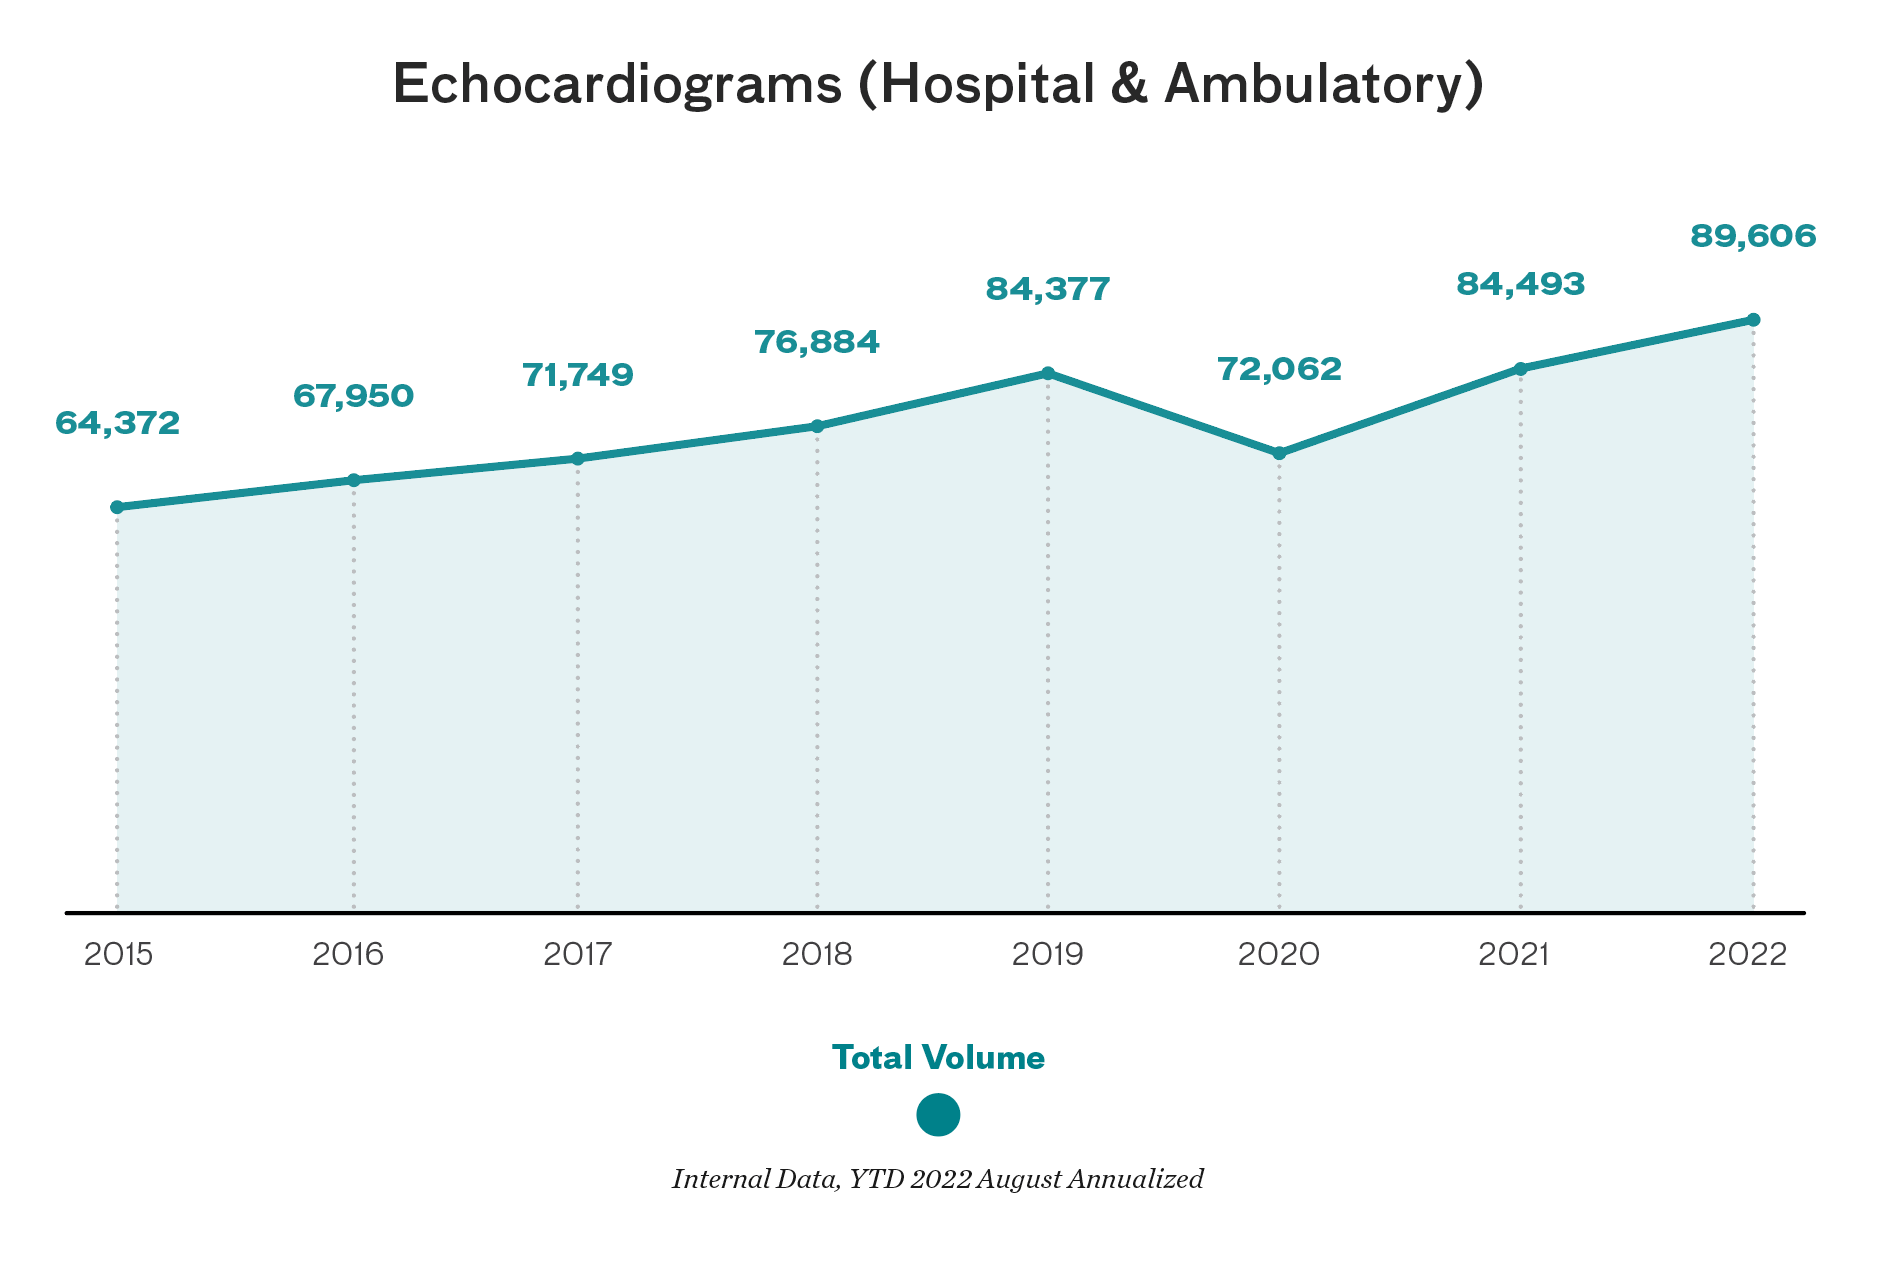 Chart showing an increase in Echocardiograms (Hospital & Ambulatory) from 64,372 in 2015, to 89,606 in 2022.  